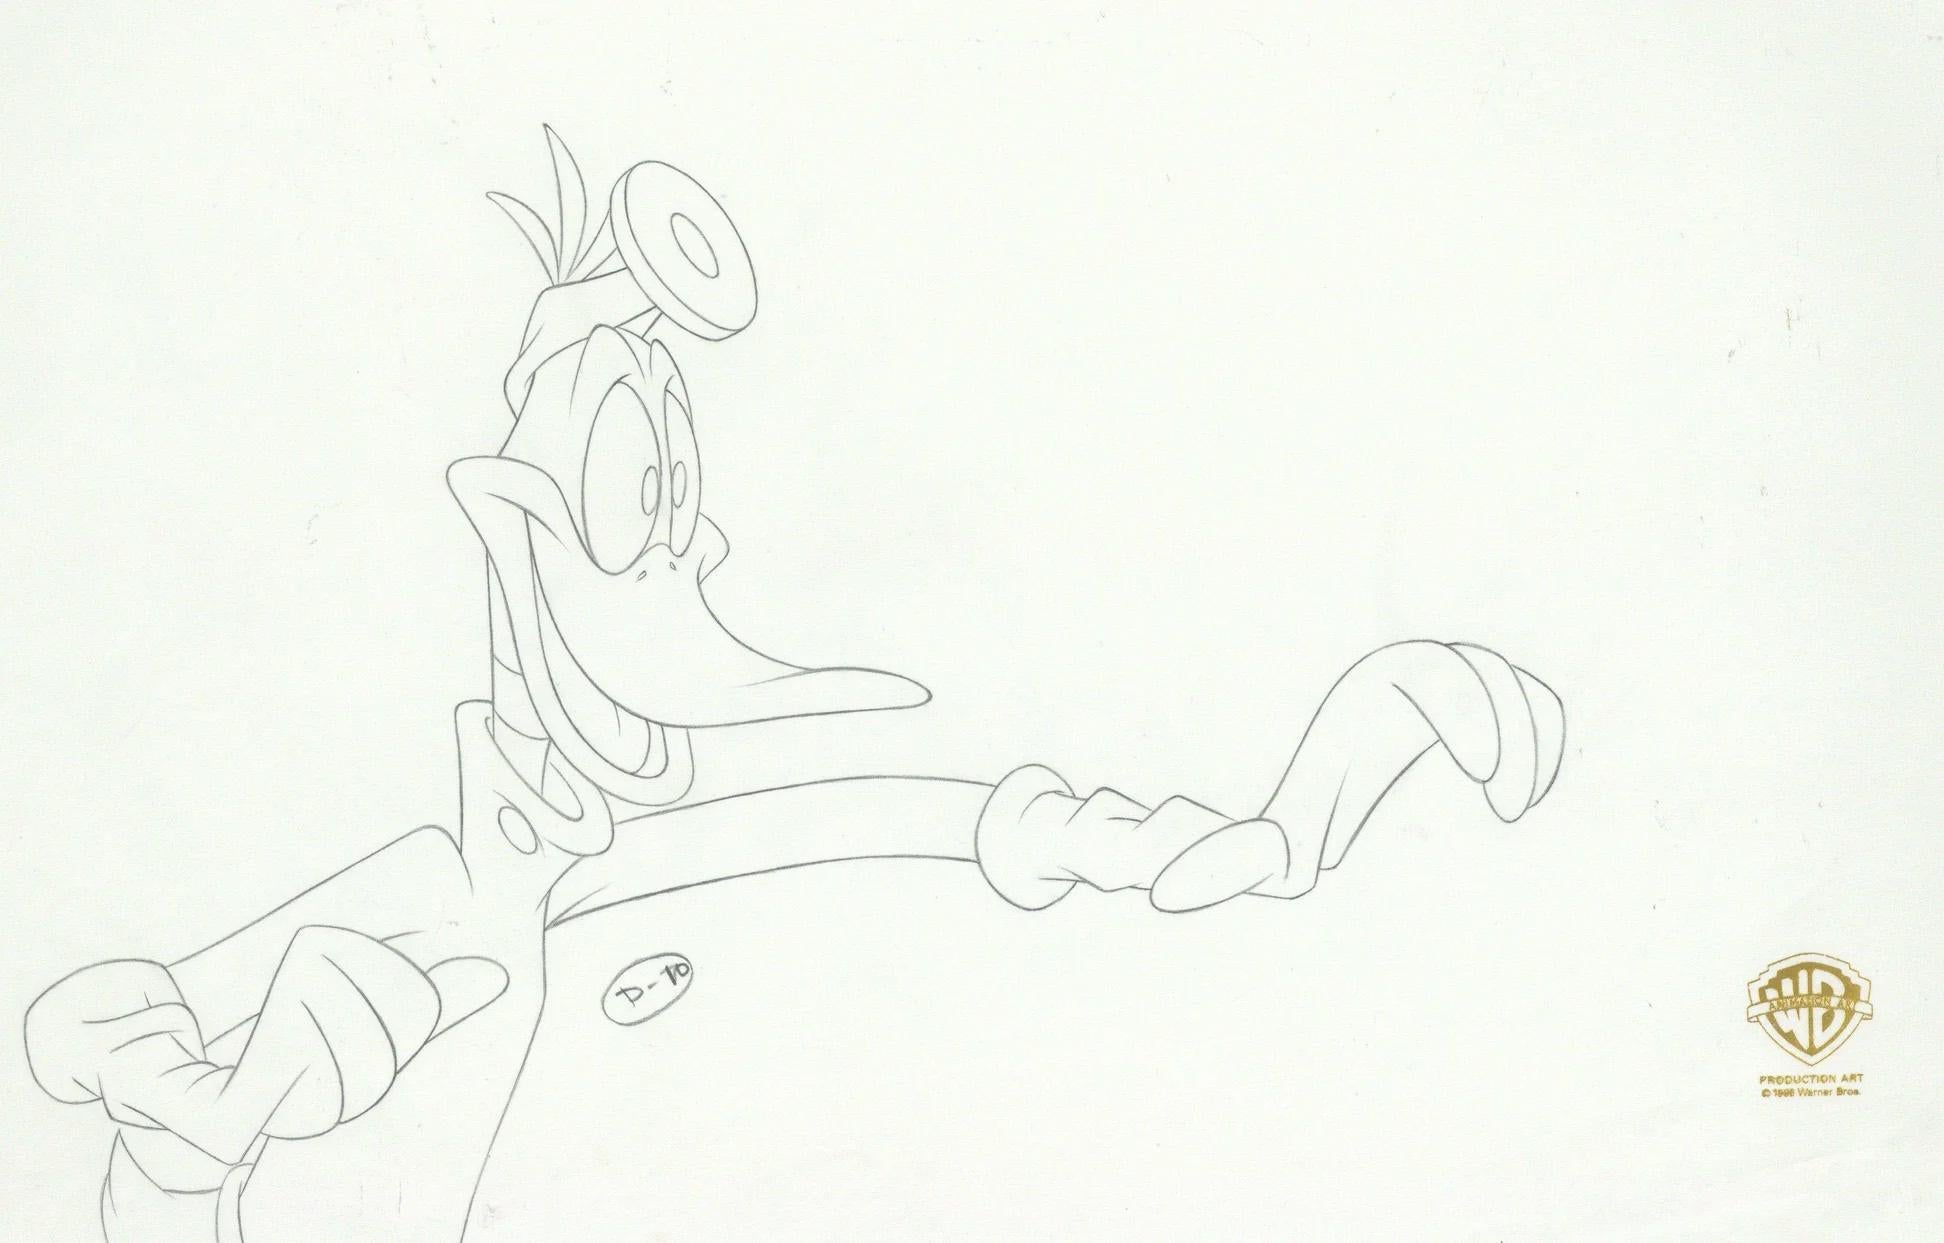 Space Jam Original Production Drawing: Daffy Duck - Art by Looney Tunes Studio Artists